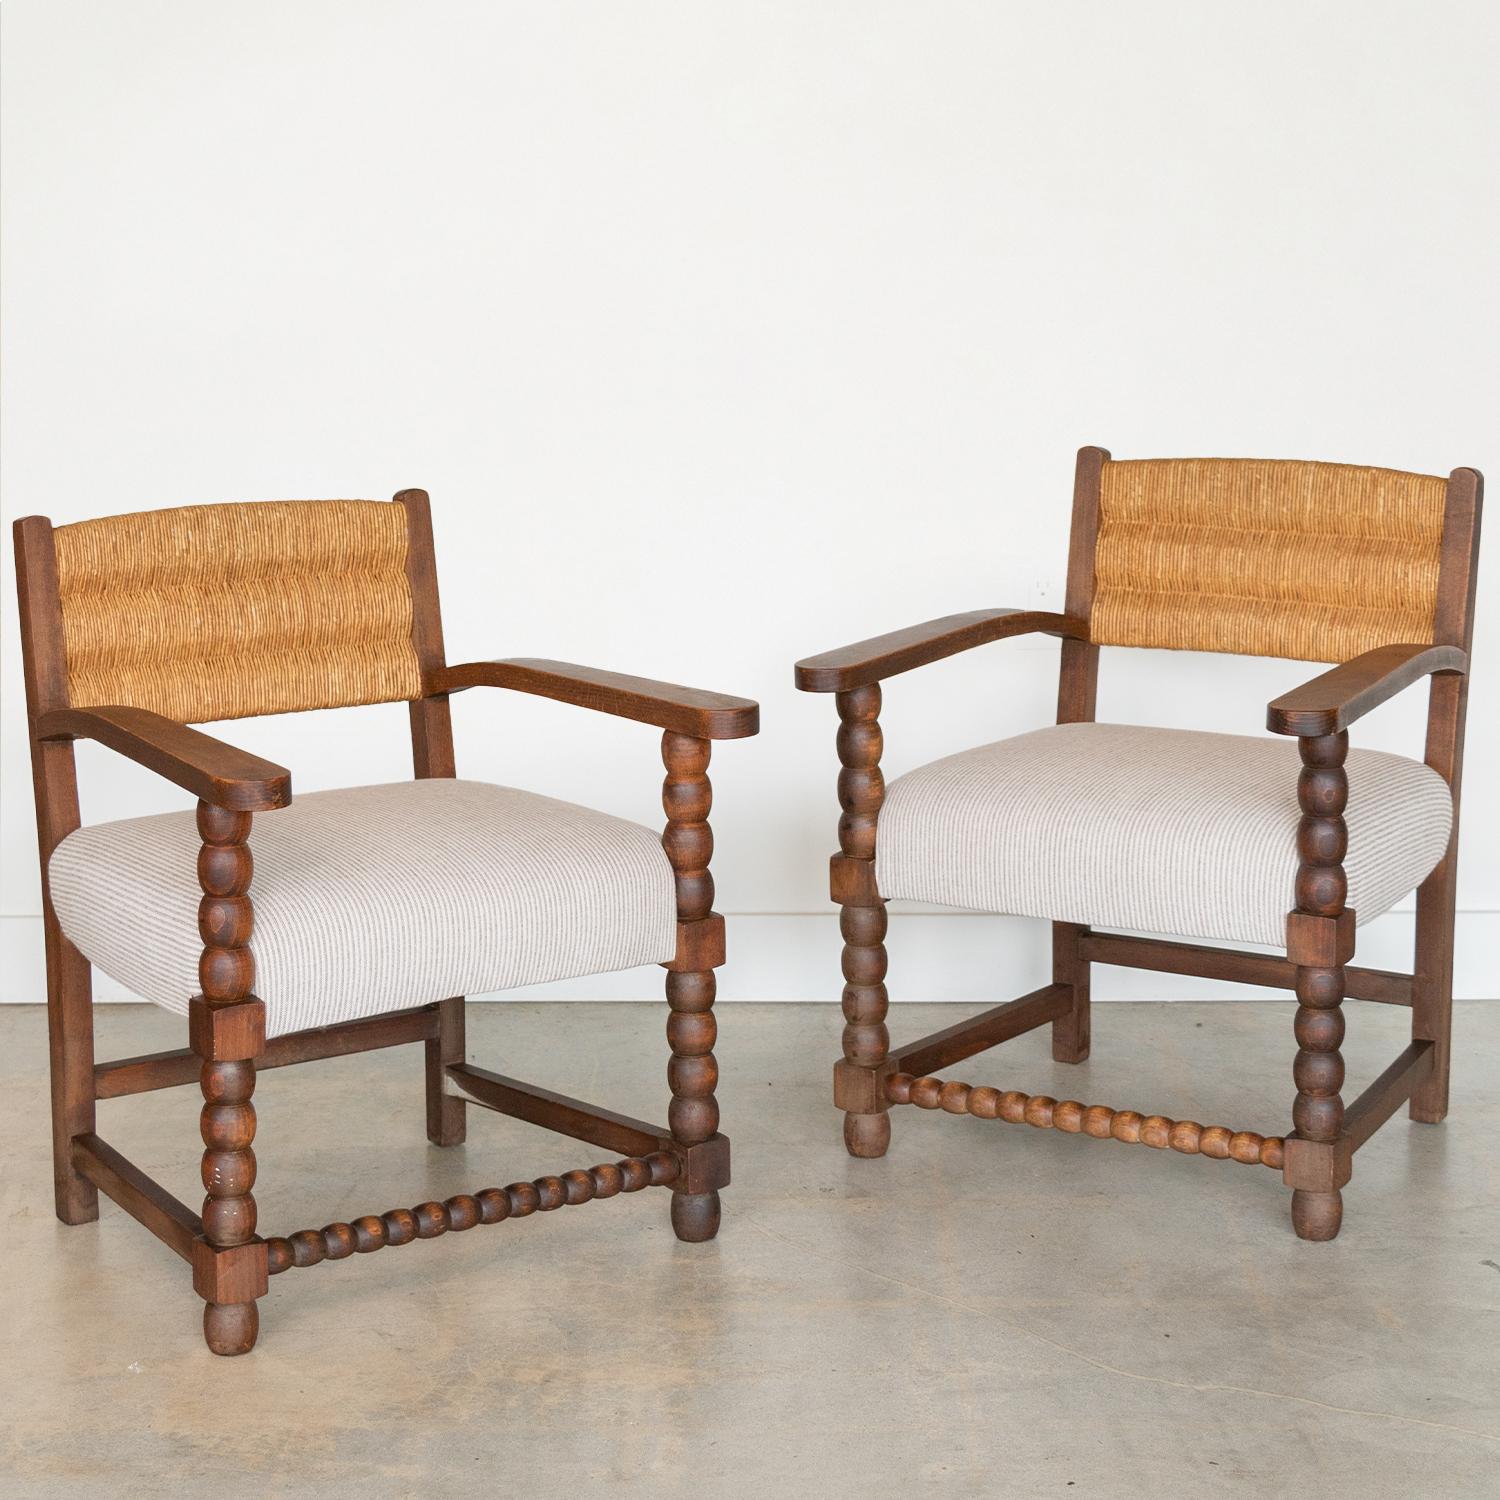 Wonderful pair of carved wood armchairs from France, 1940s. Beautiful carved bobbin wood legs and frame with dark stain. Original woven rush backs. Newly upholstered seat in pale striped cream and brown linen blend.